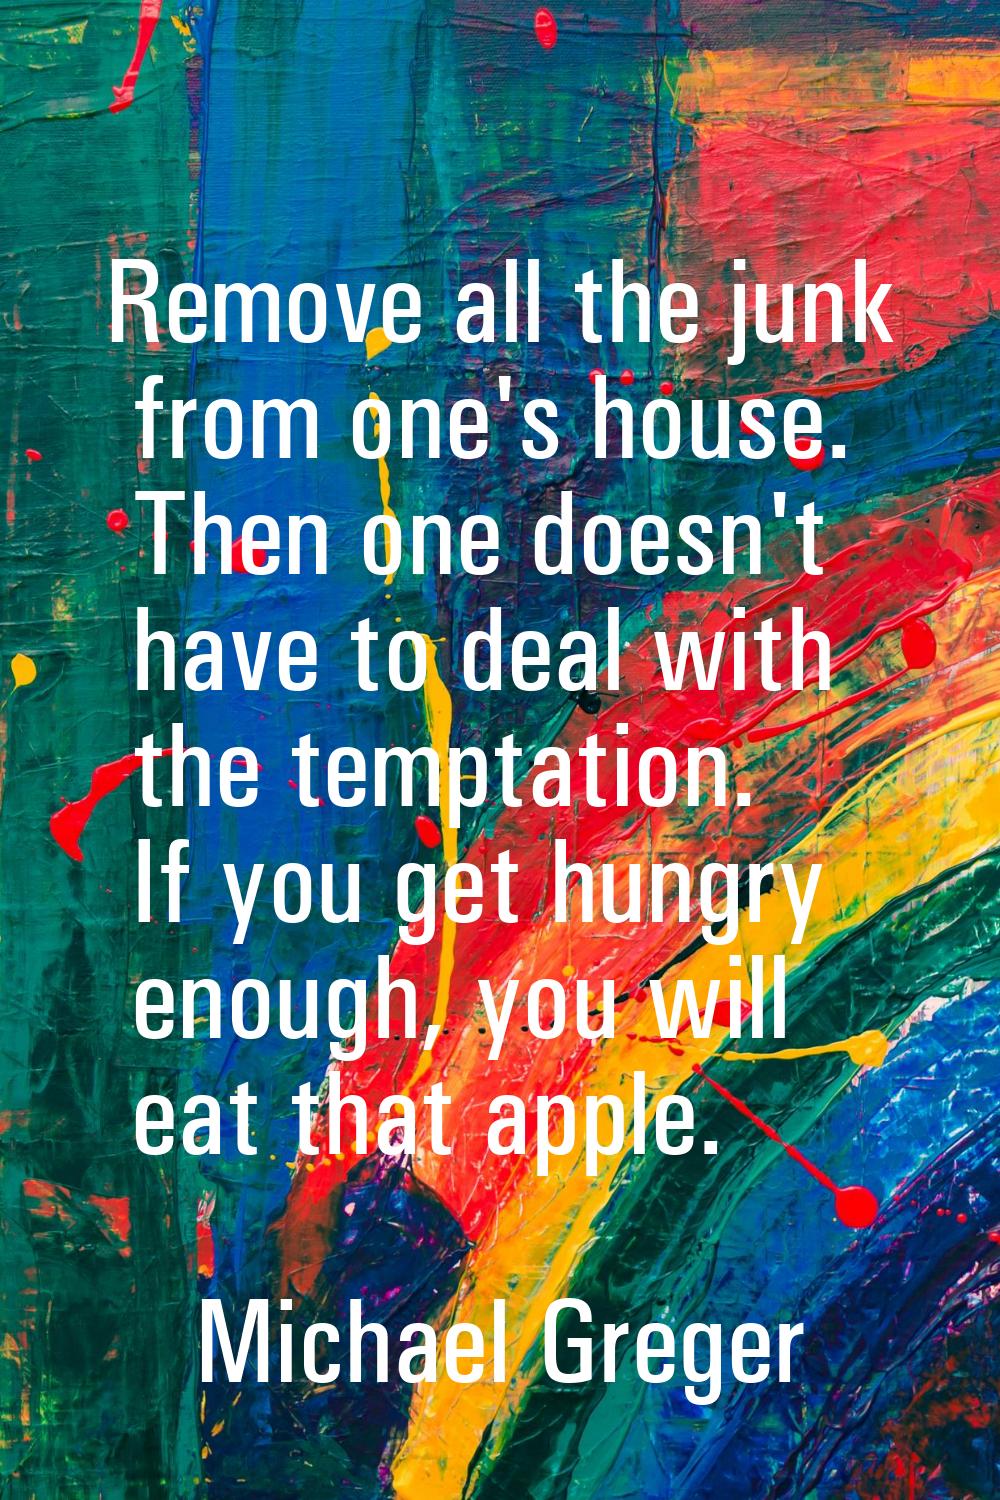 Remove all the junk from one's house. Then one doesn't have to deal with the temptation. If you get